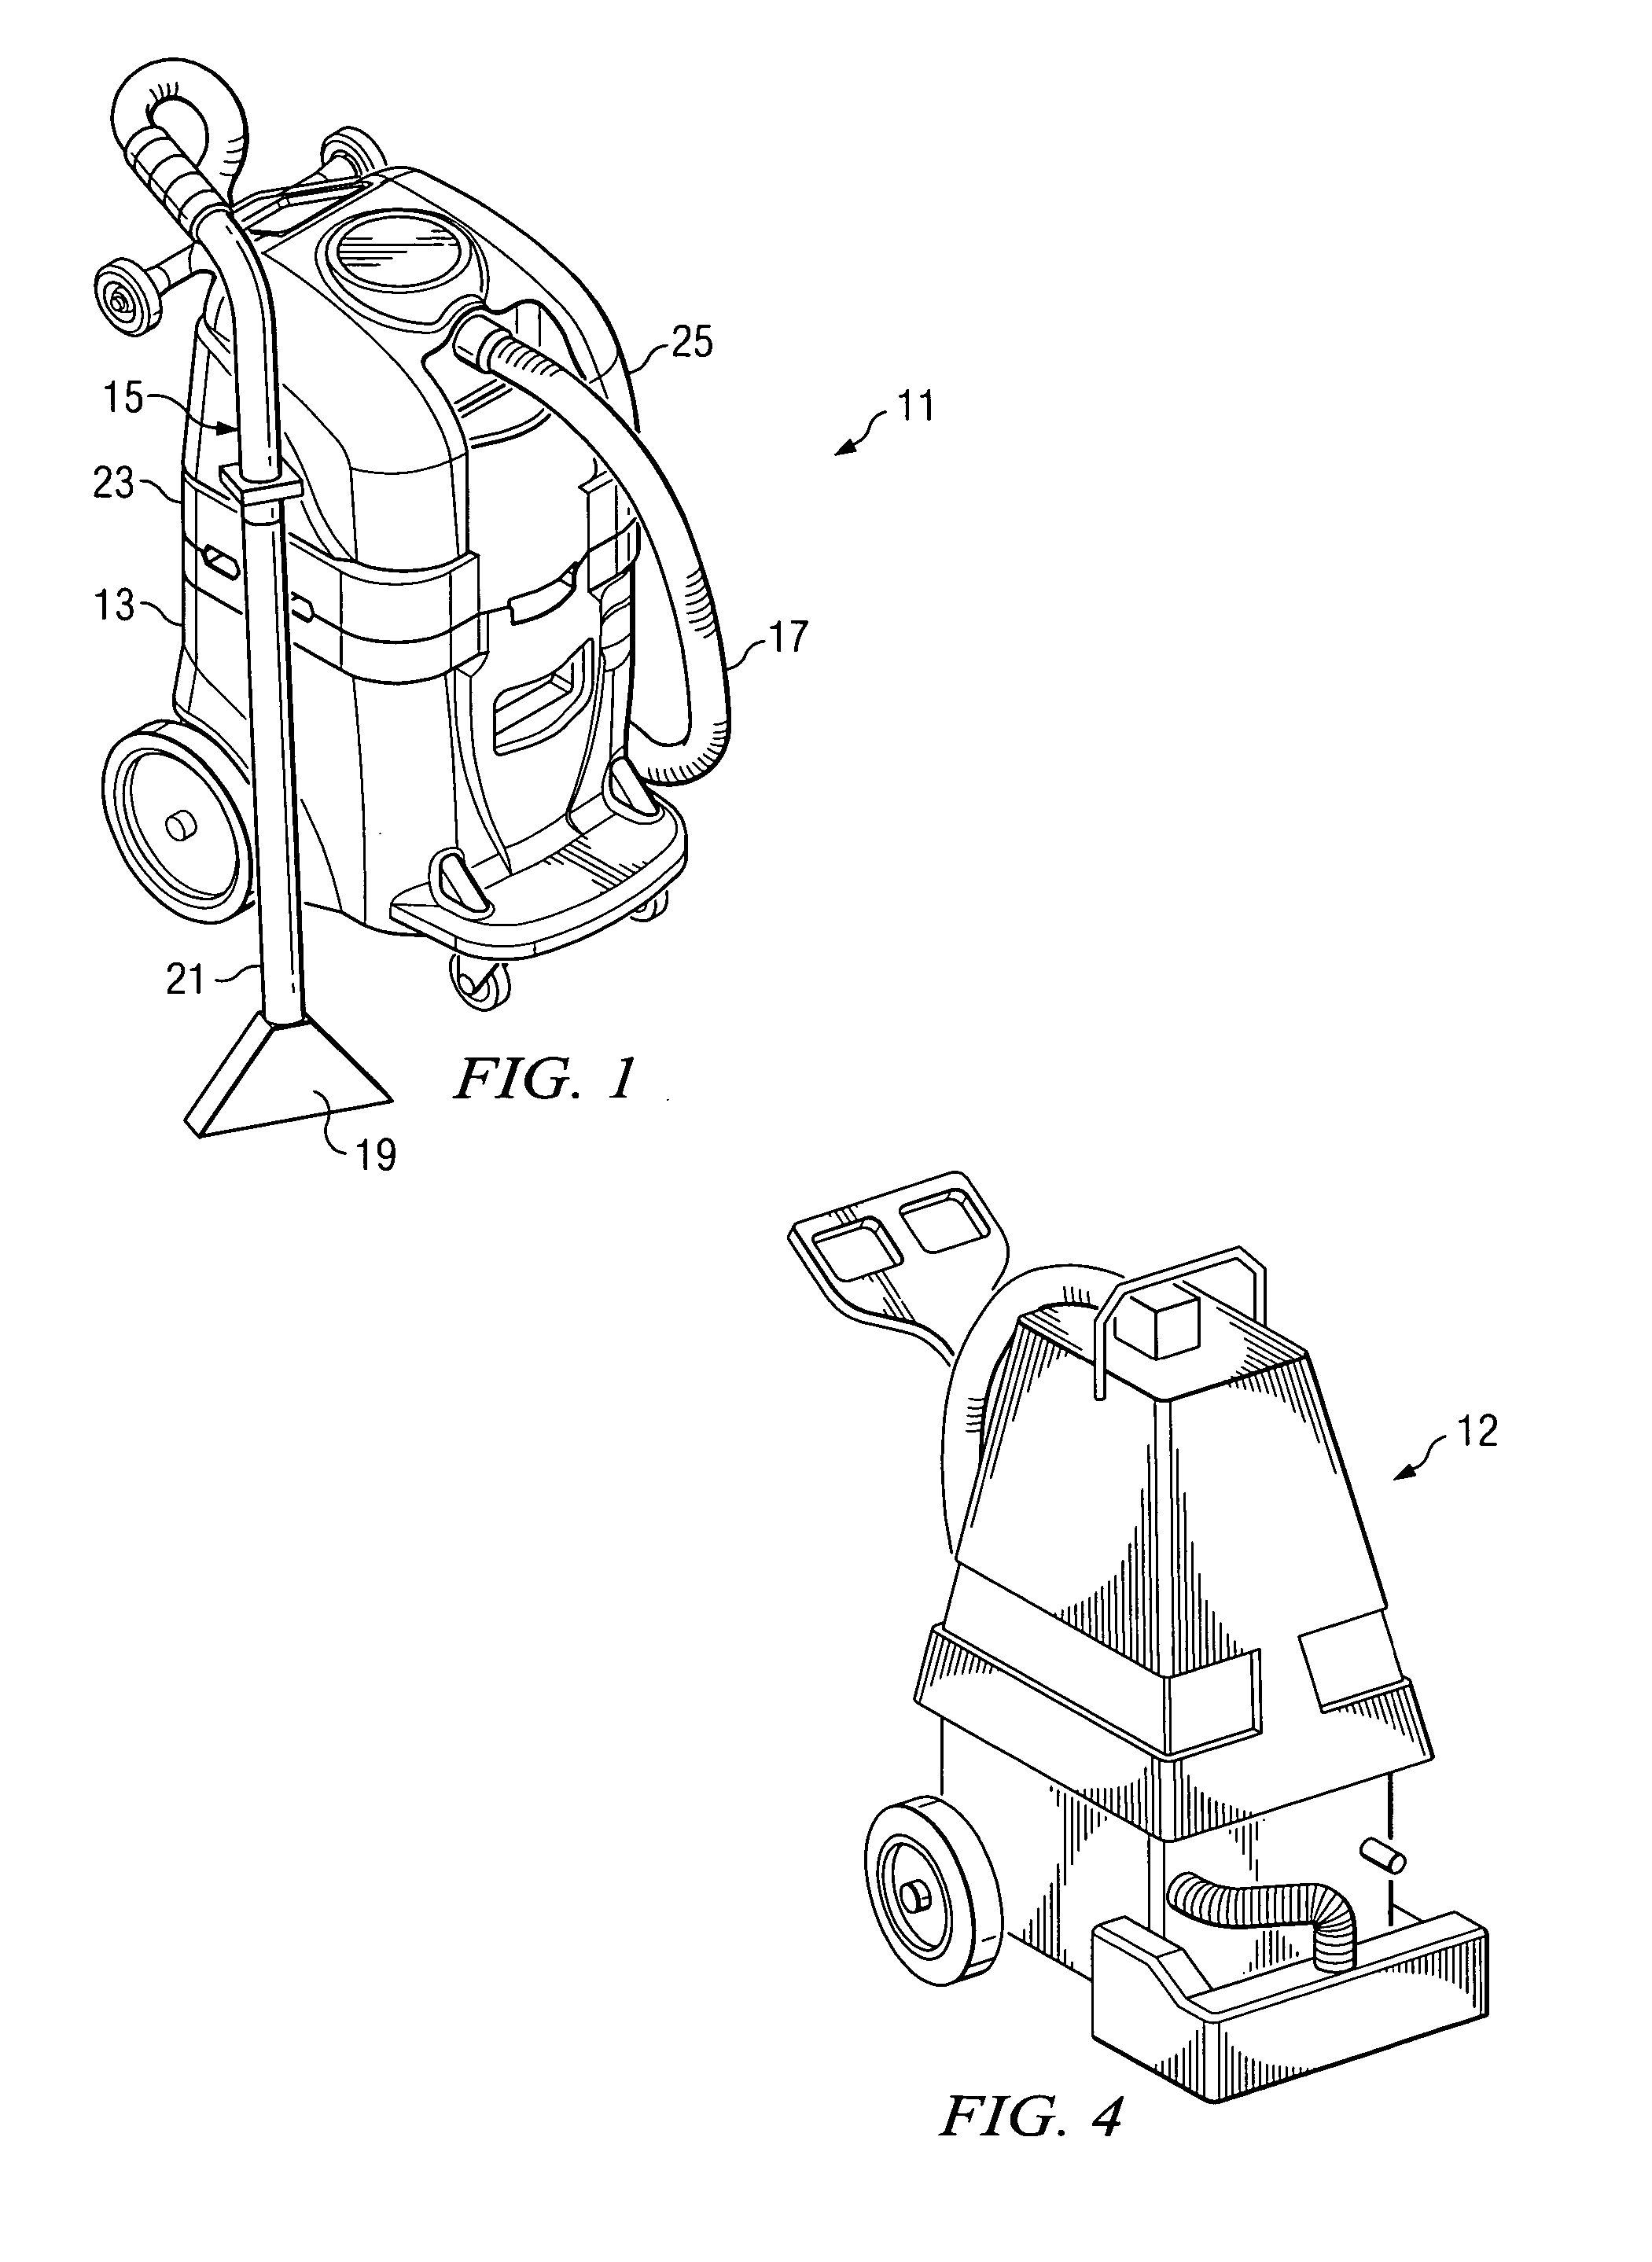 Heating system for a portable carpet extractor